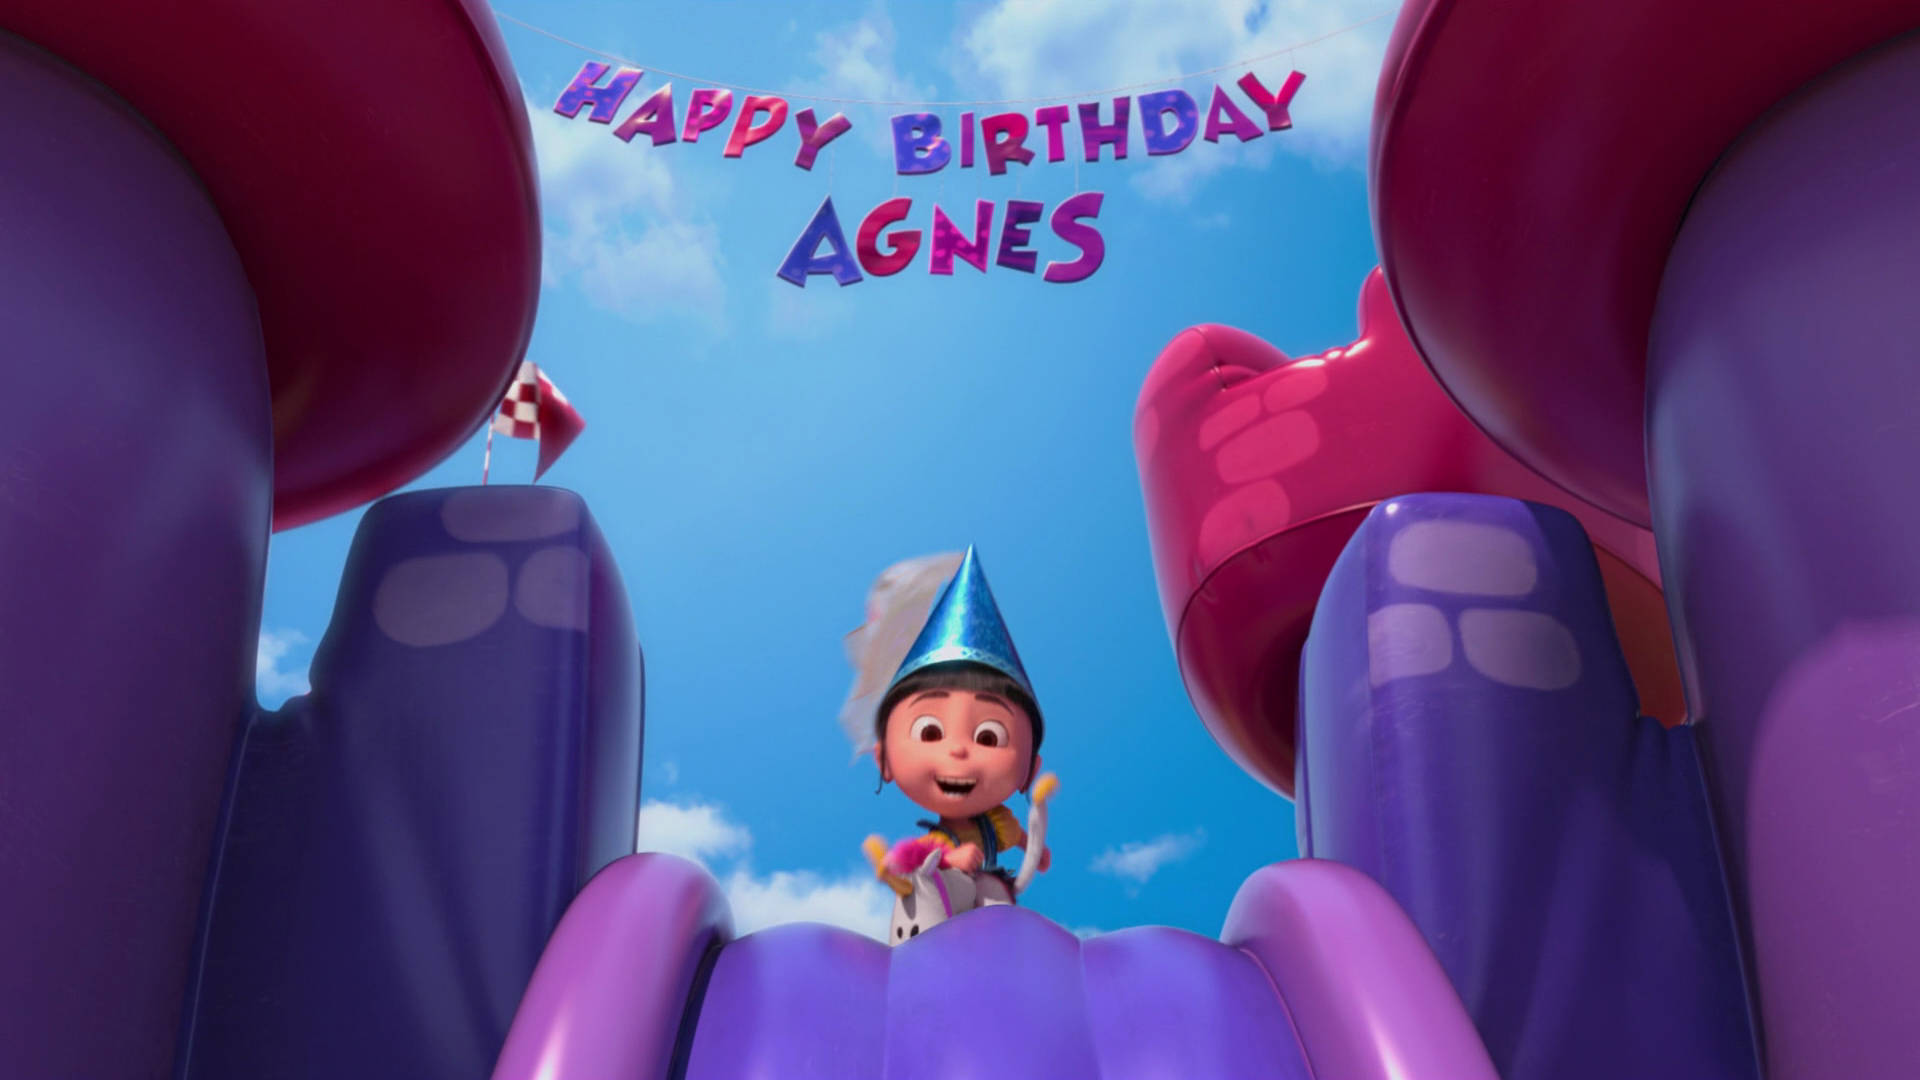 Agnes Birthday Party Despicable Me 2 Wallpaper